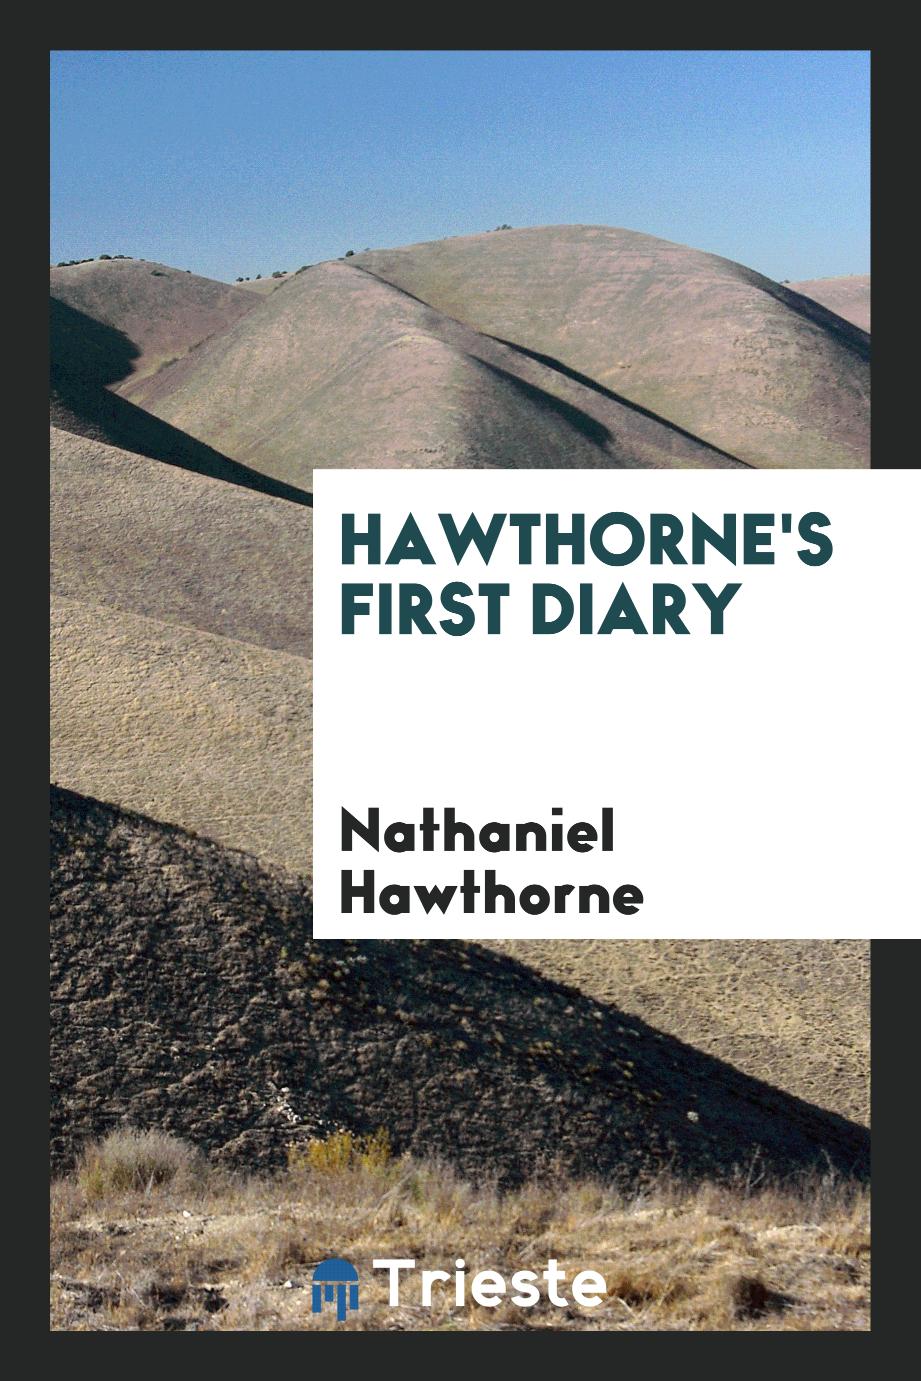 Hawthorne's First Diary